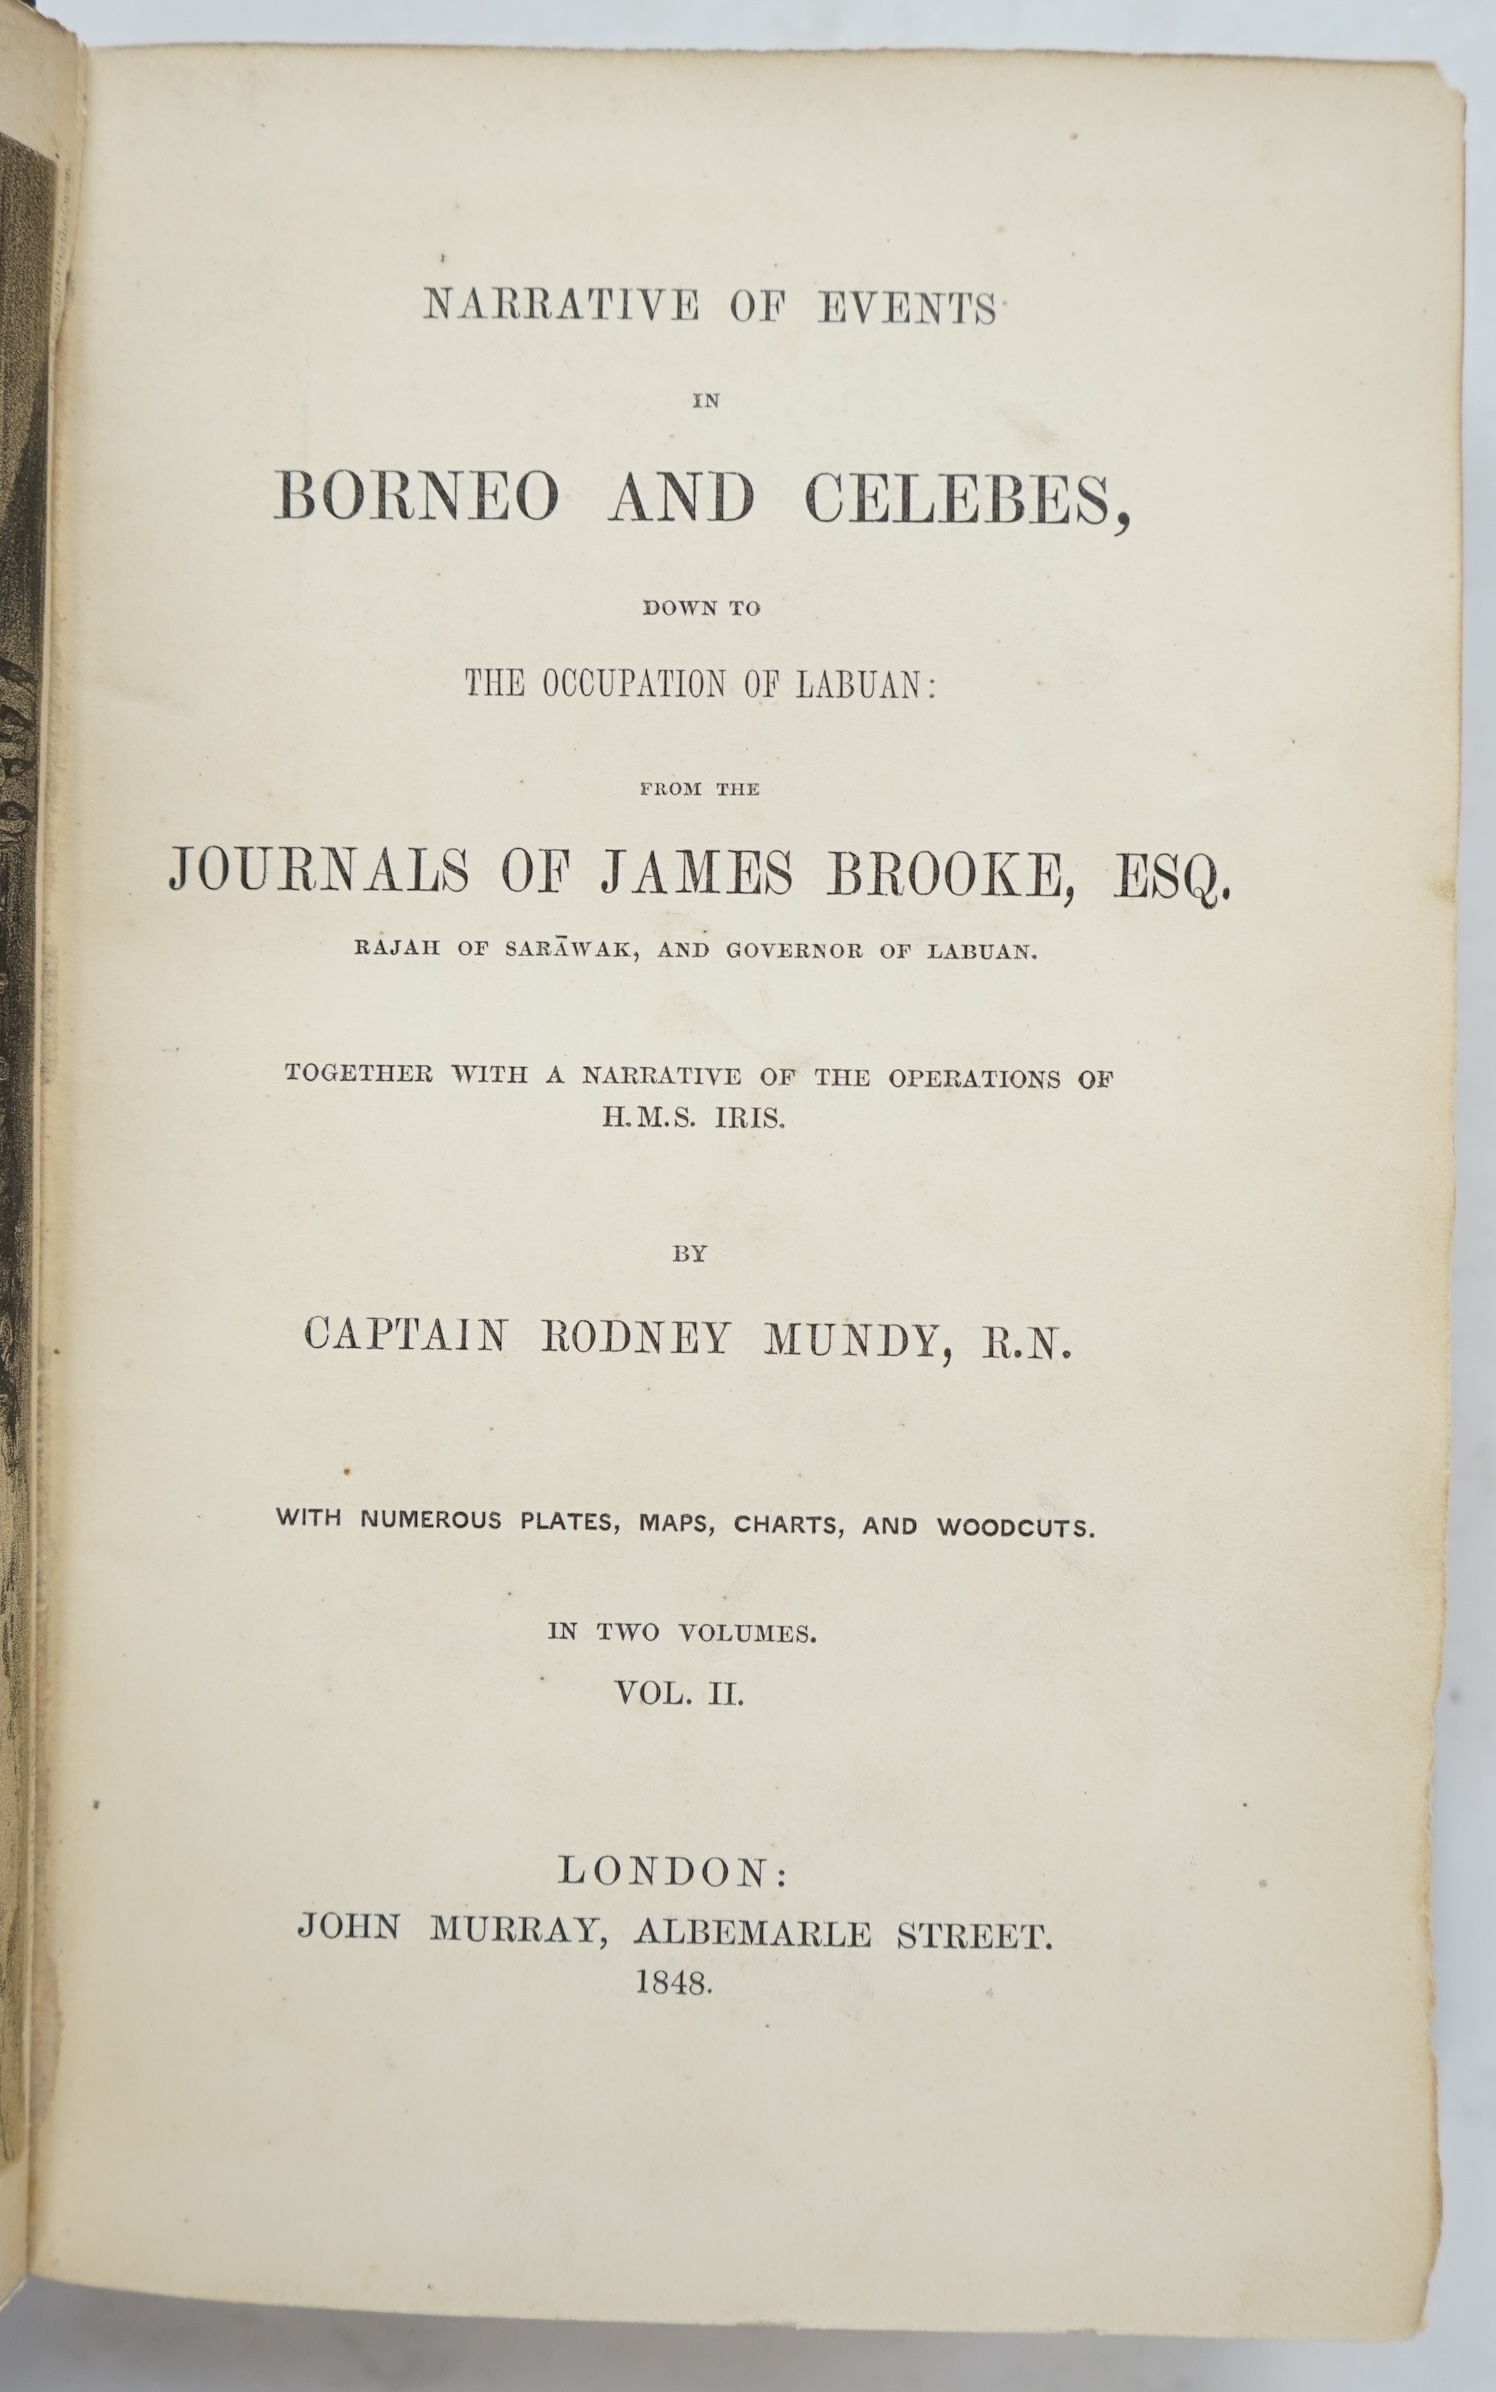 Mundy, Captain Rodney - Narrative of Events in Borneo and Celebes, down to the Occupation of Labuan... together with a Narrative of the Operations of H.M.S. Iris. 2 volumes, 1st edition, 1848